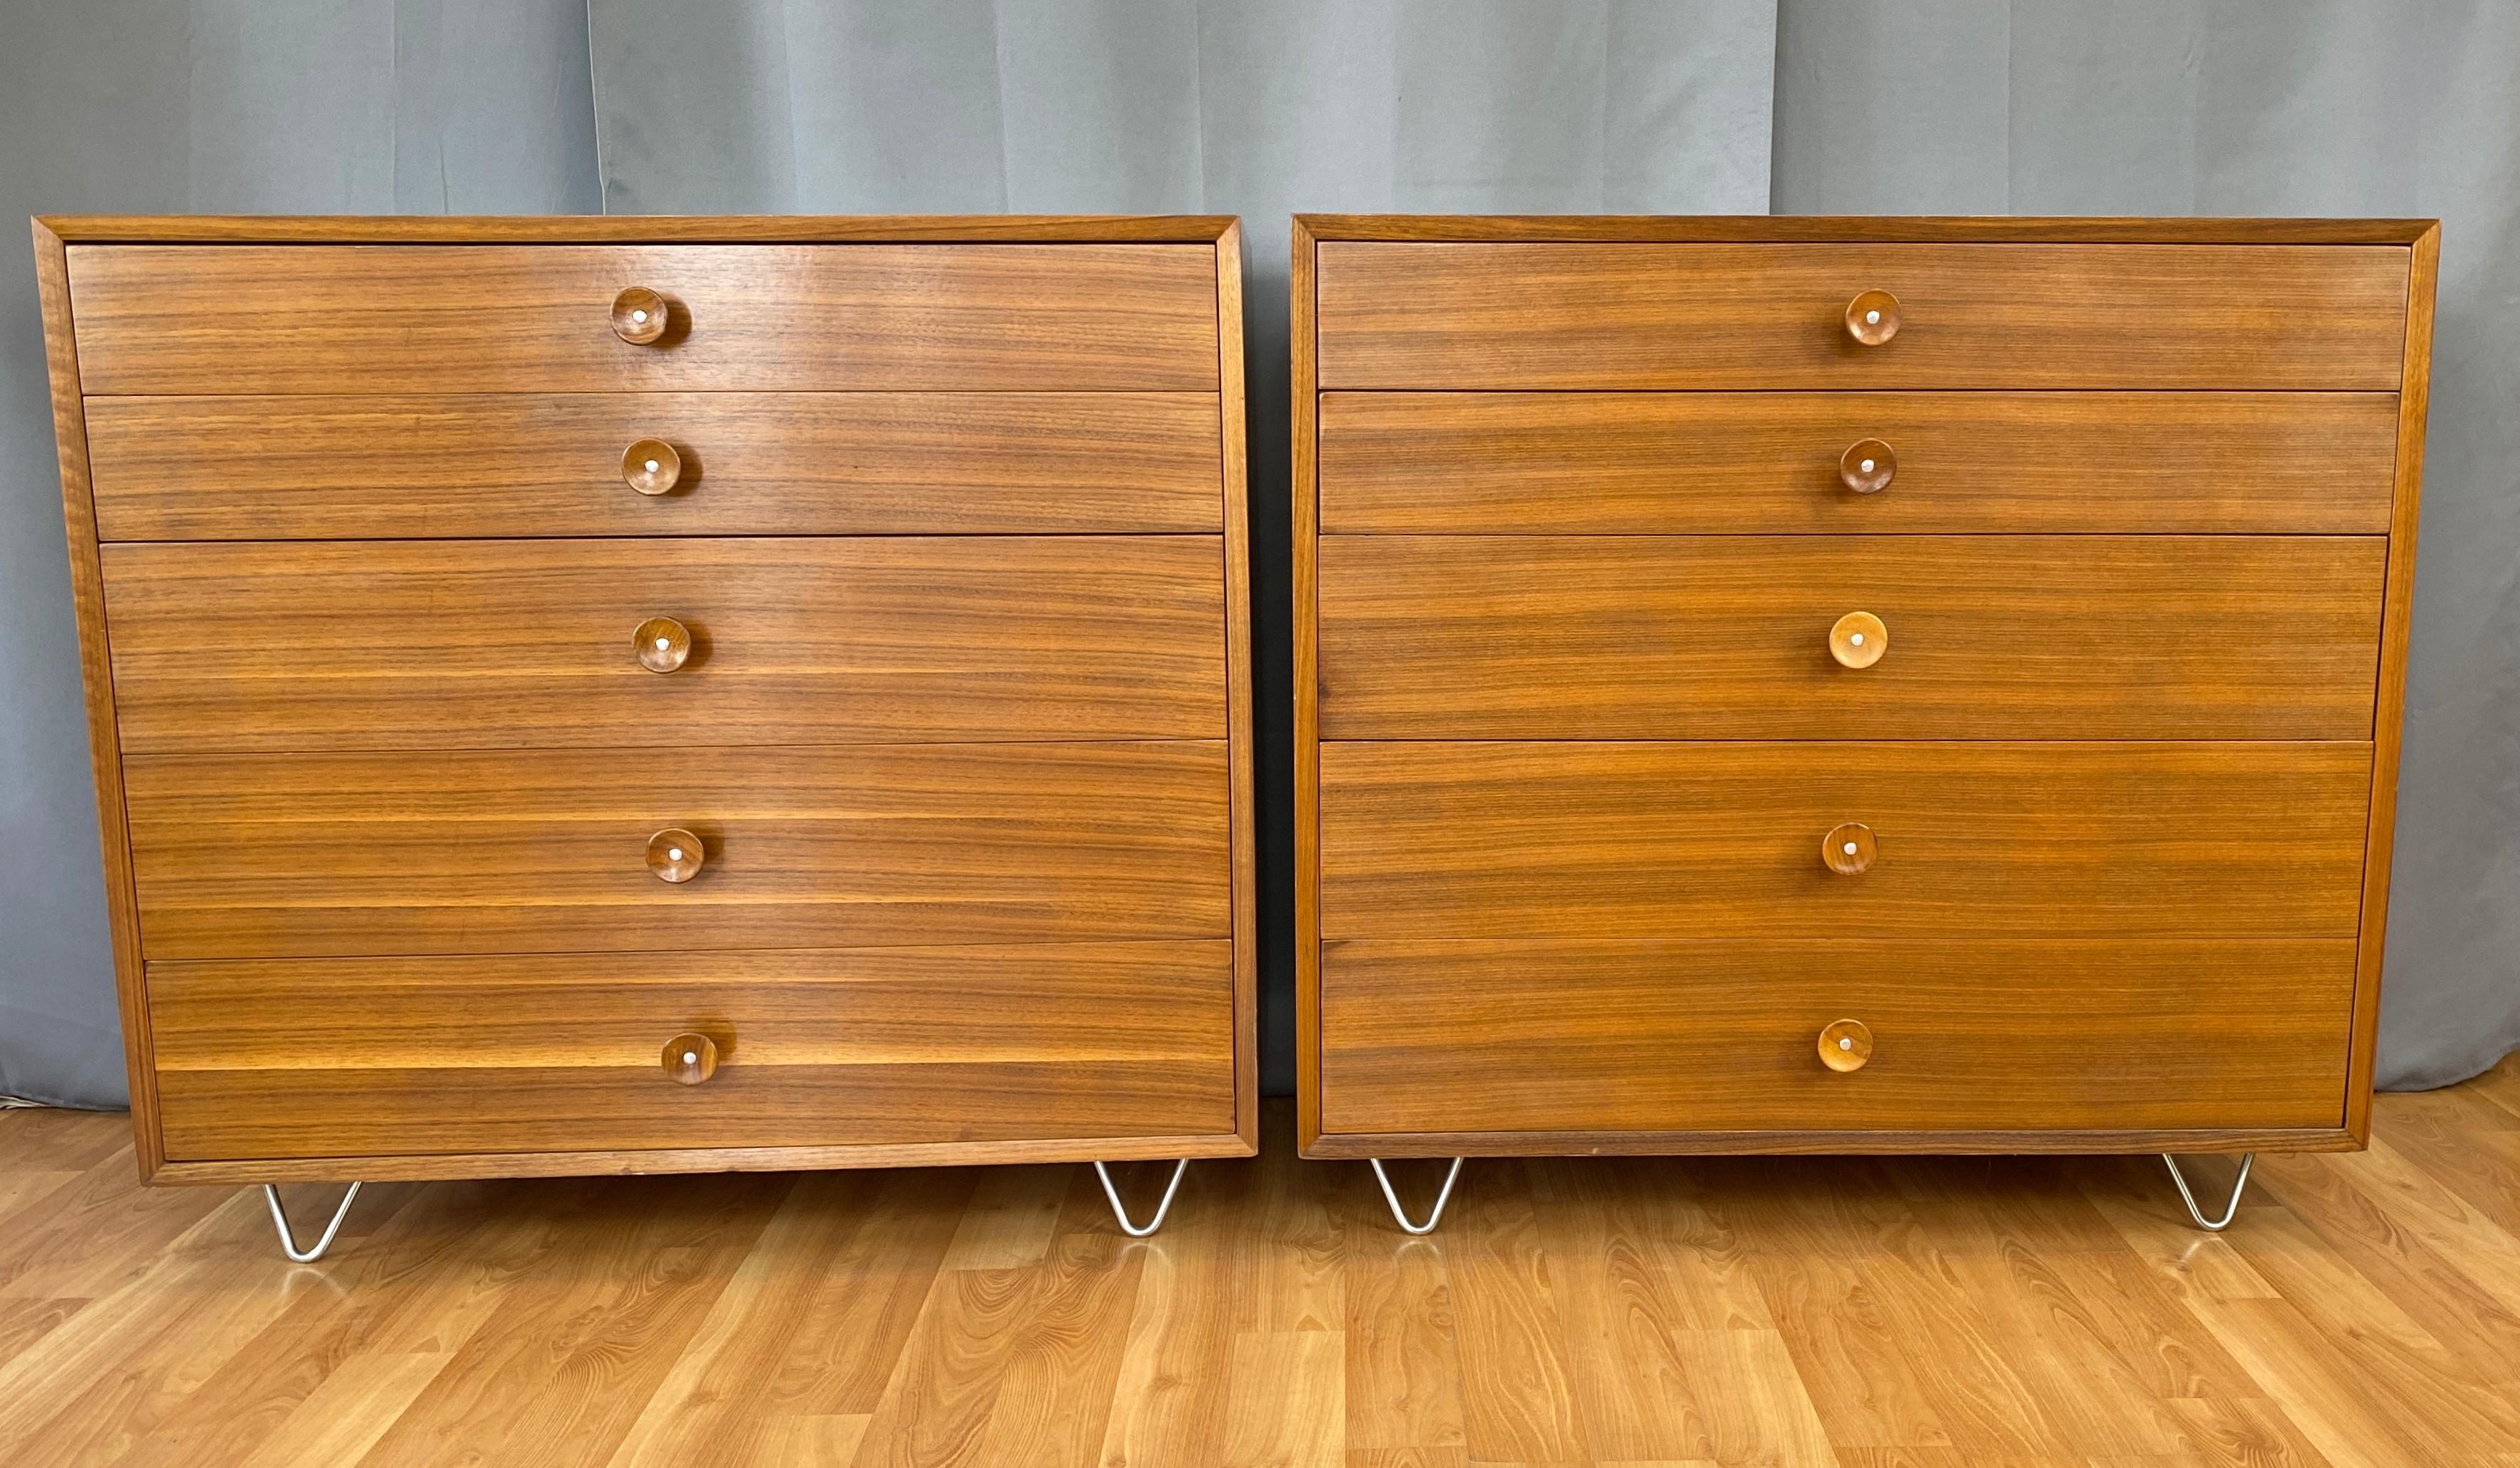 A pair of George Nelson designed dressers for Herman Miller. Both dressers are Walnut and have cupcake pulls.
Five drawers on each, with the top drawer on both has dividers. Labels in top drawers, right side.
Both have newer hairpin legs.